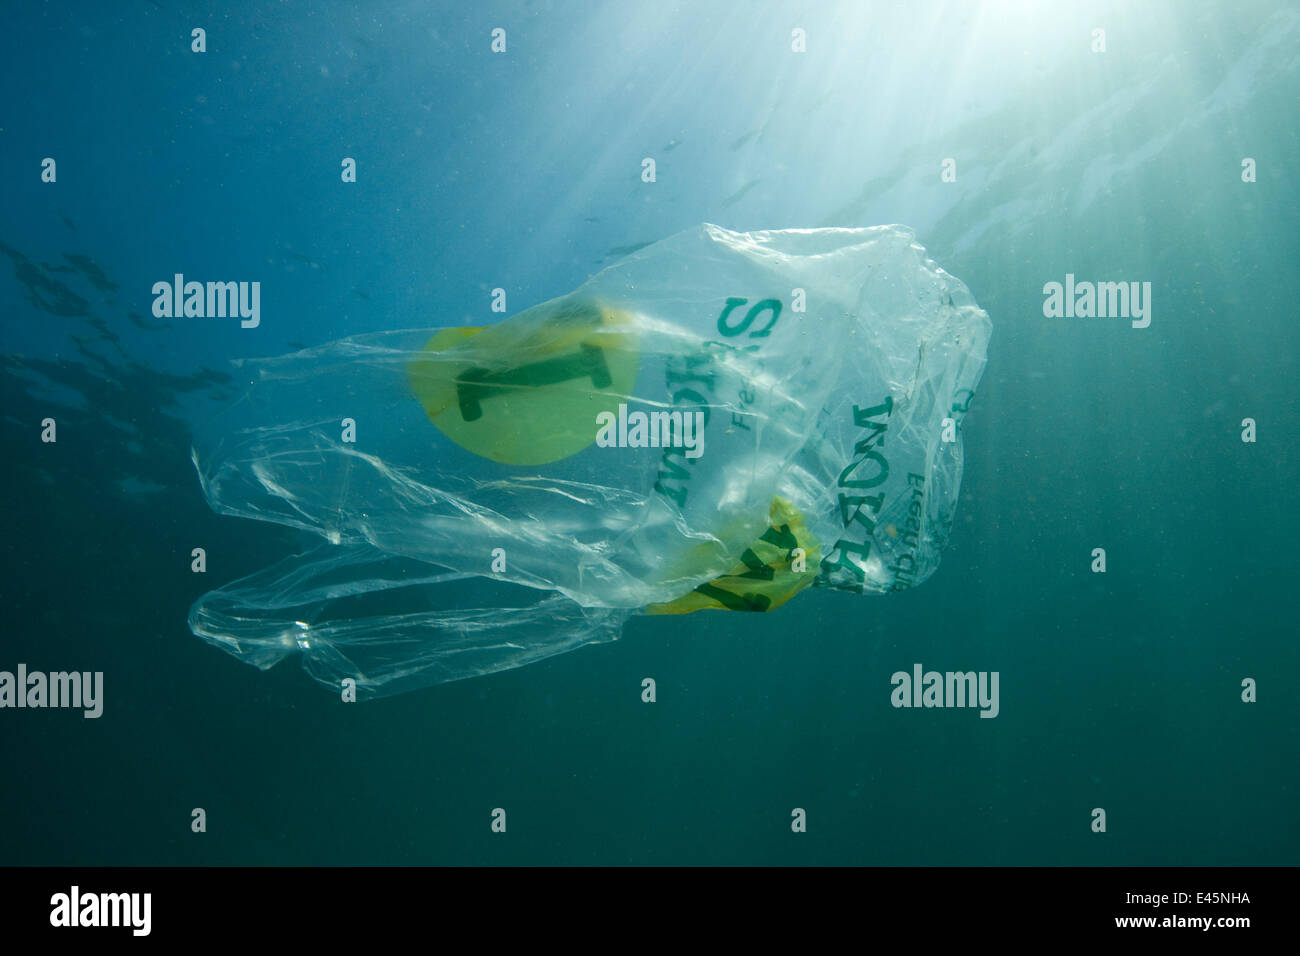 Plastic bag floating in the sea, resembling a jellyfish swimming  Dangerous to sea turtles Stock Photo